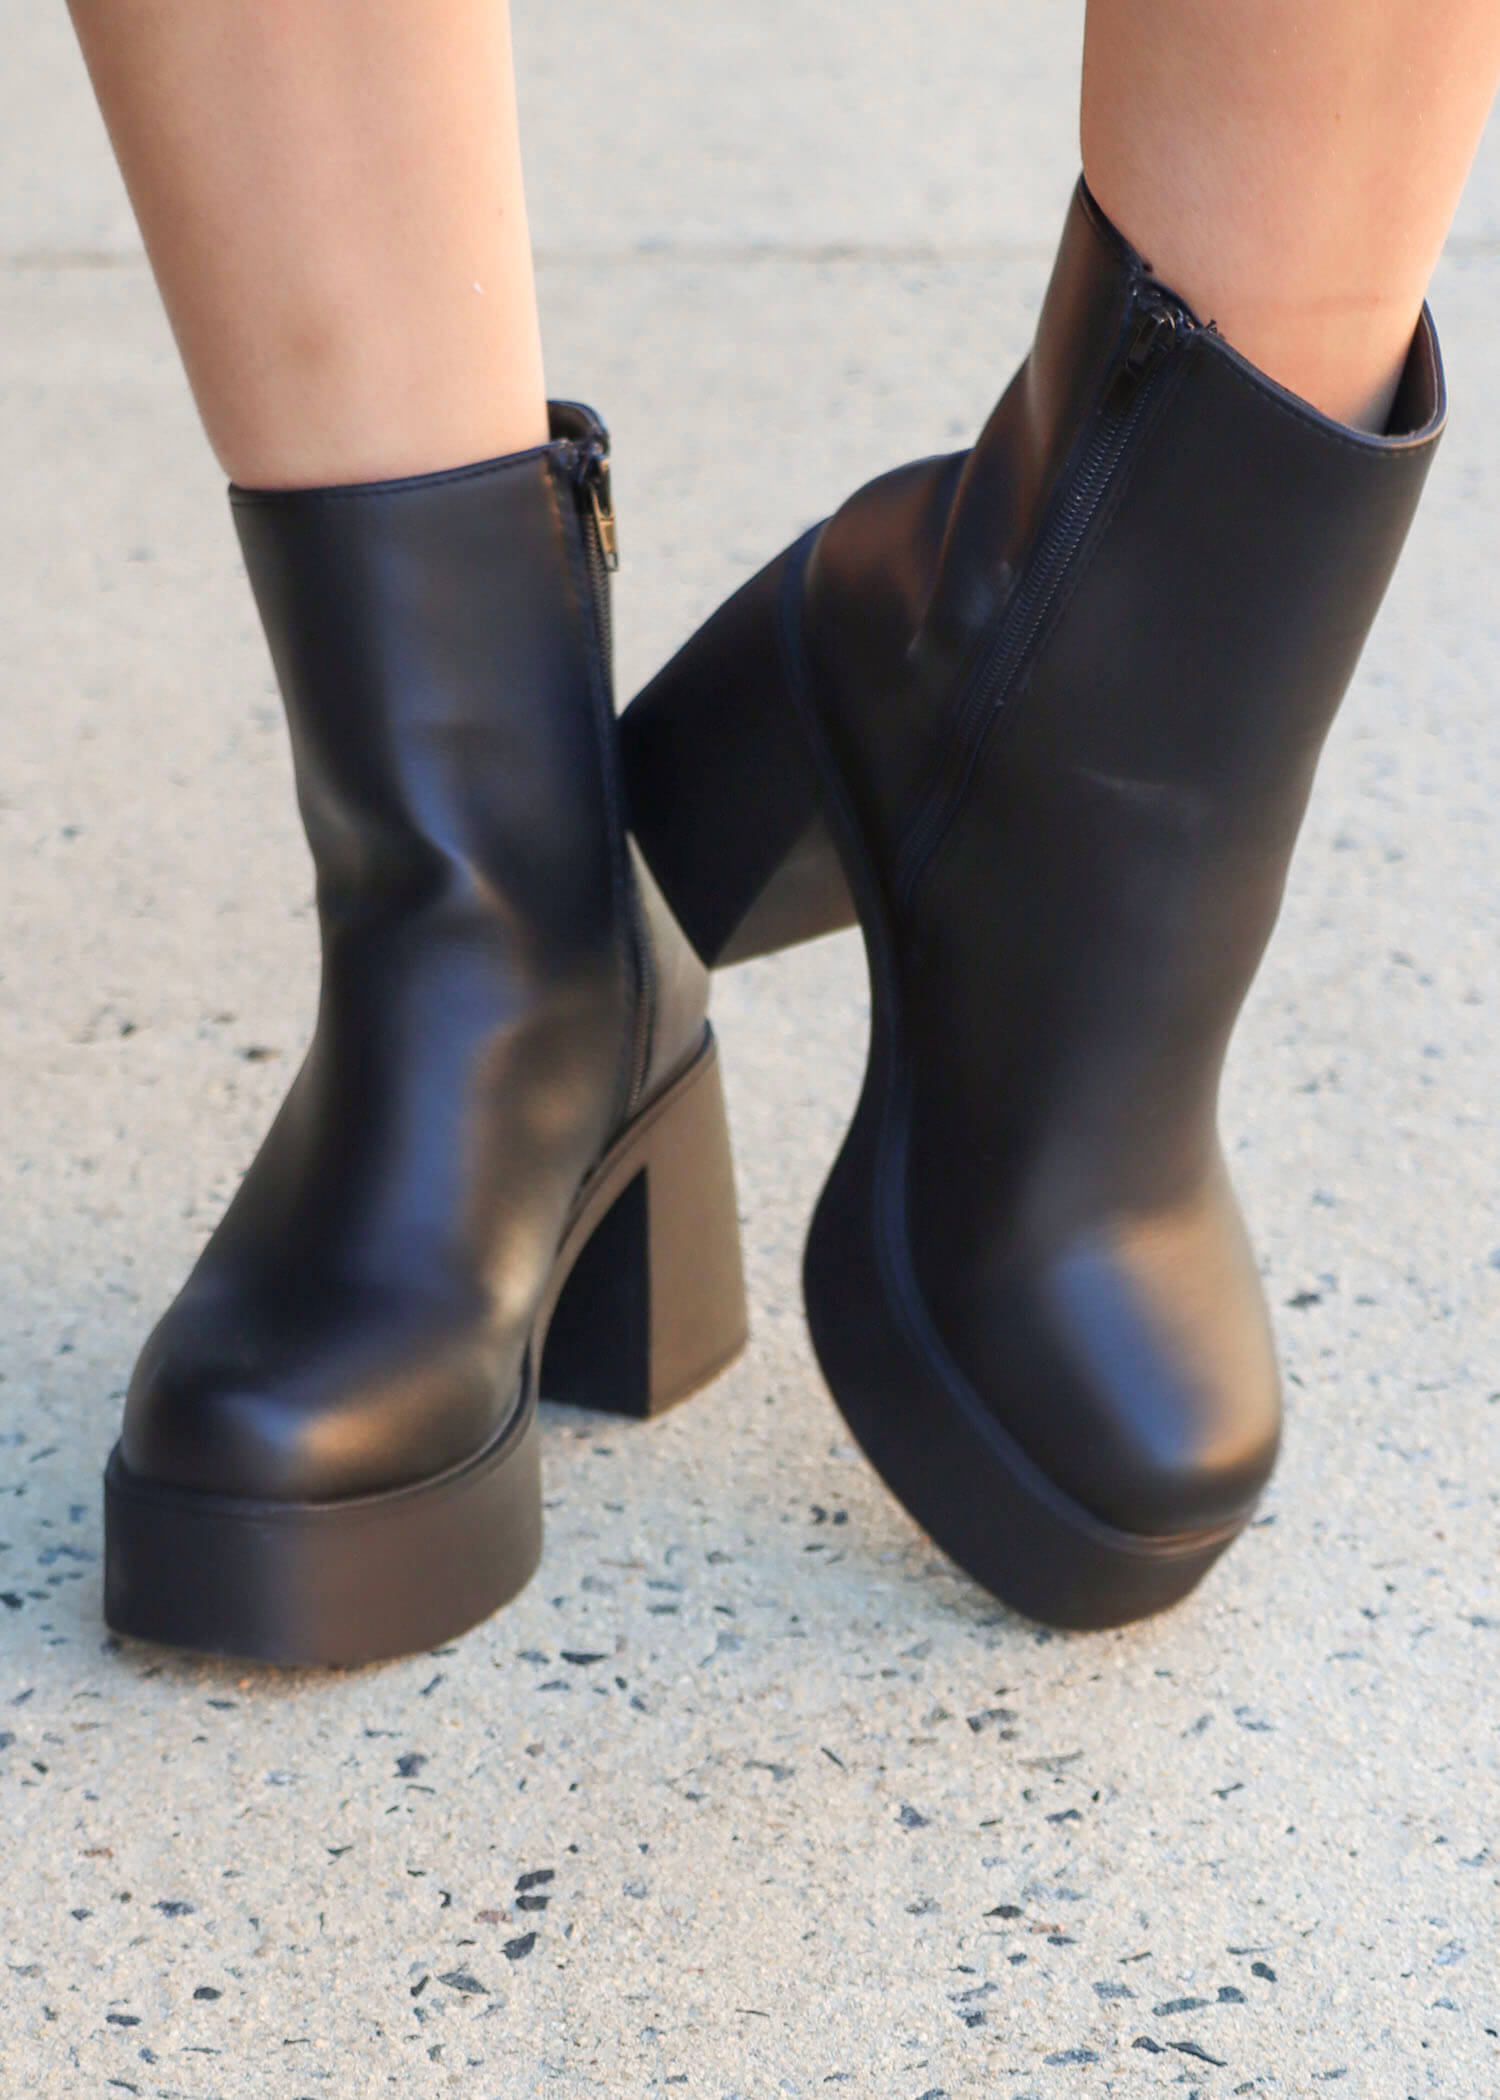 Can't Stop Ankle Boots - Black PU